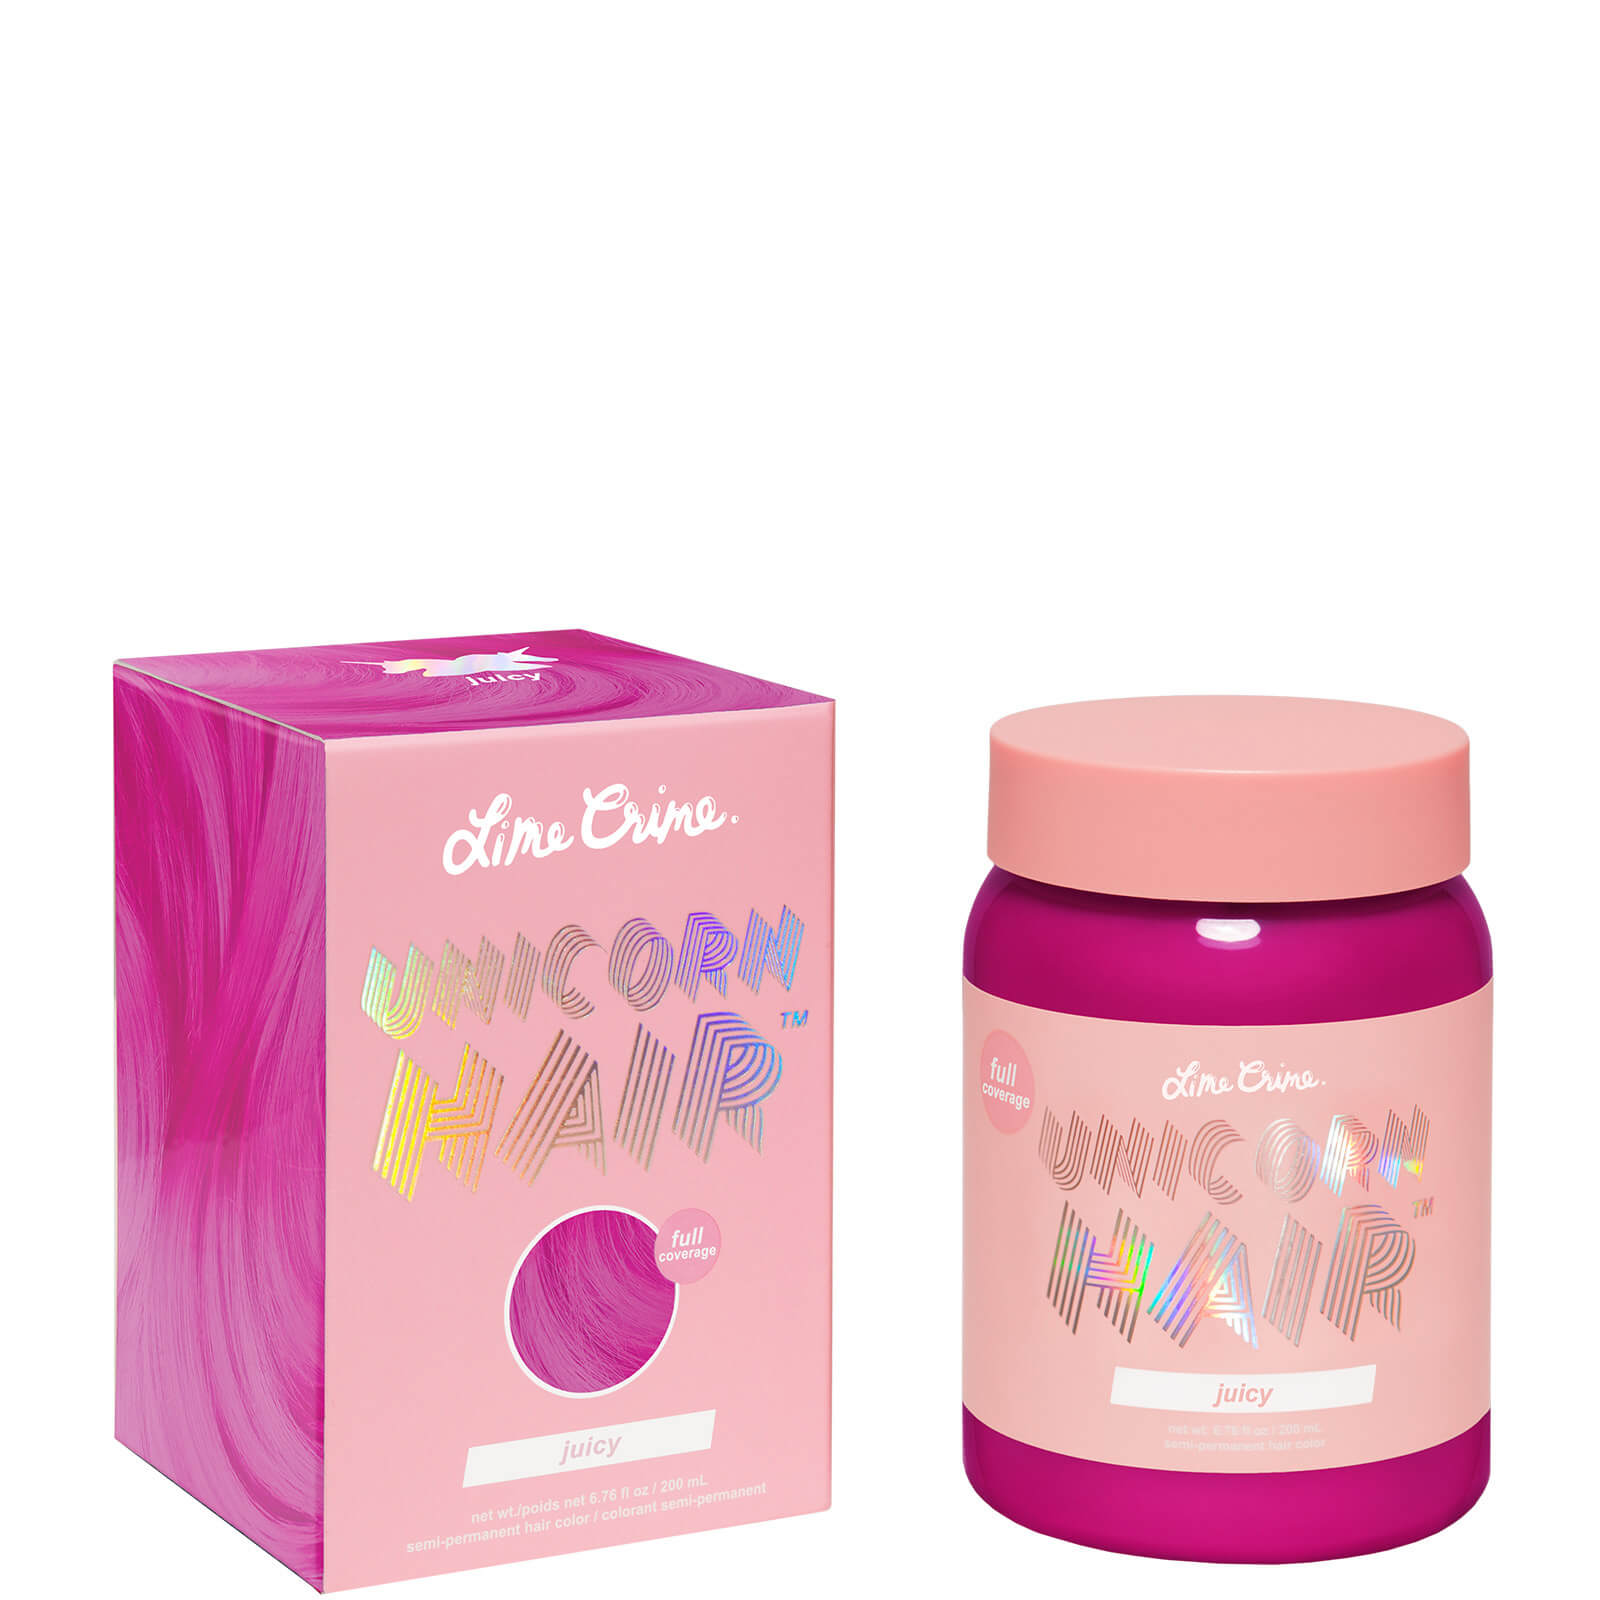 Lime Crime Unicorn Hair Full Coverage Tint 200ml (various Shades) - Juicy